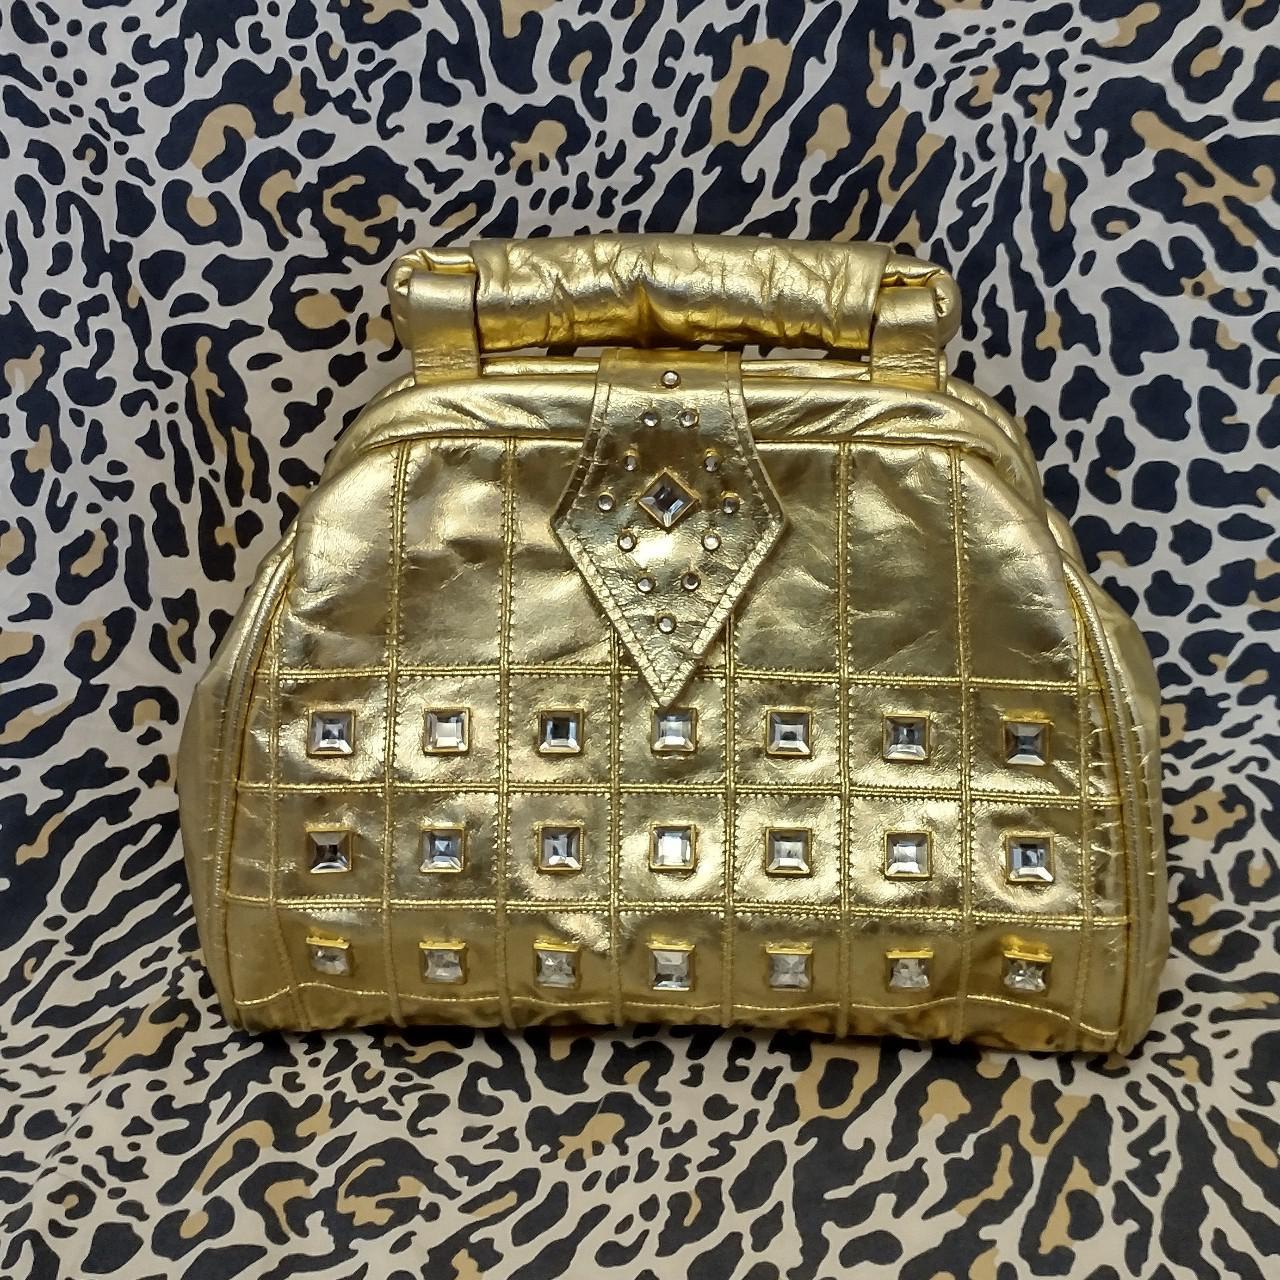 American Vintage Women's Gold and Silver Bag